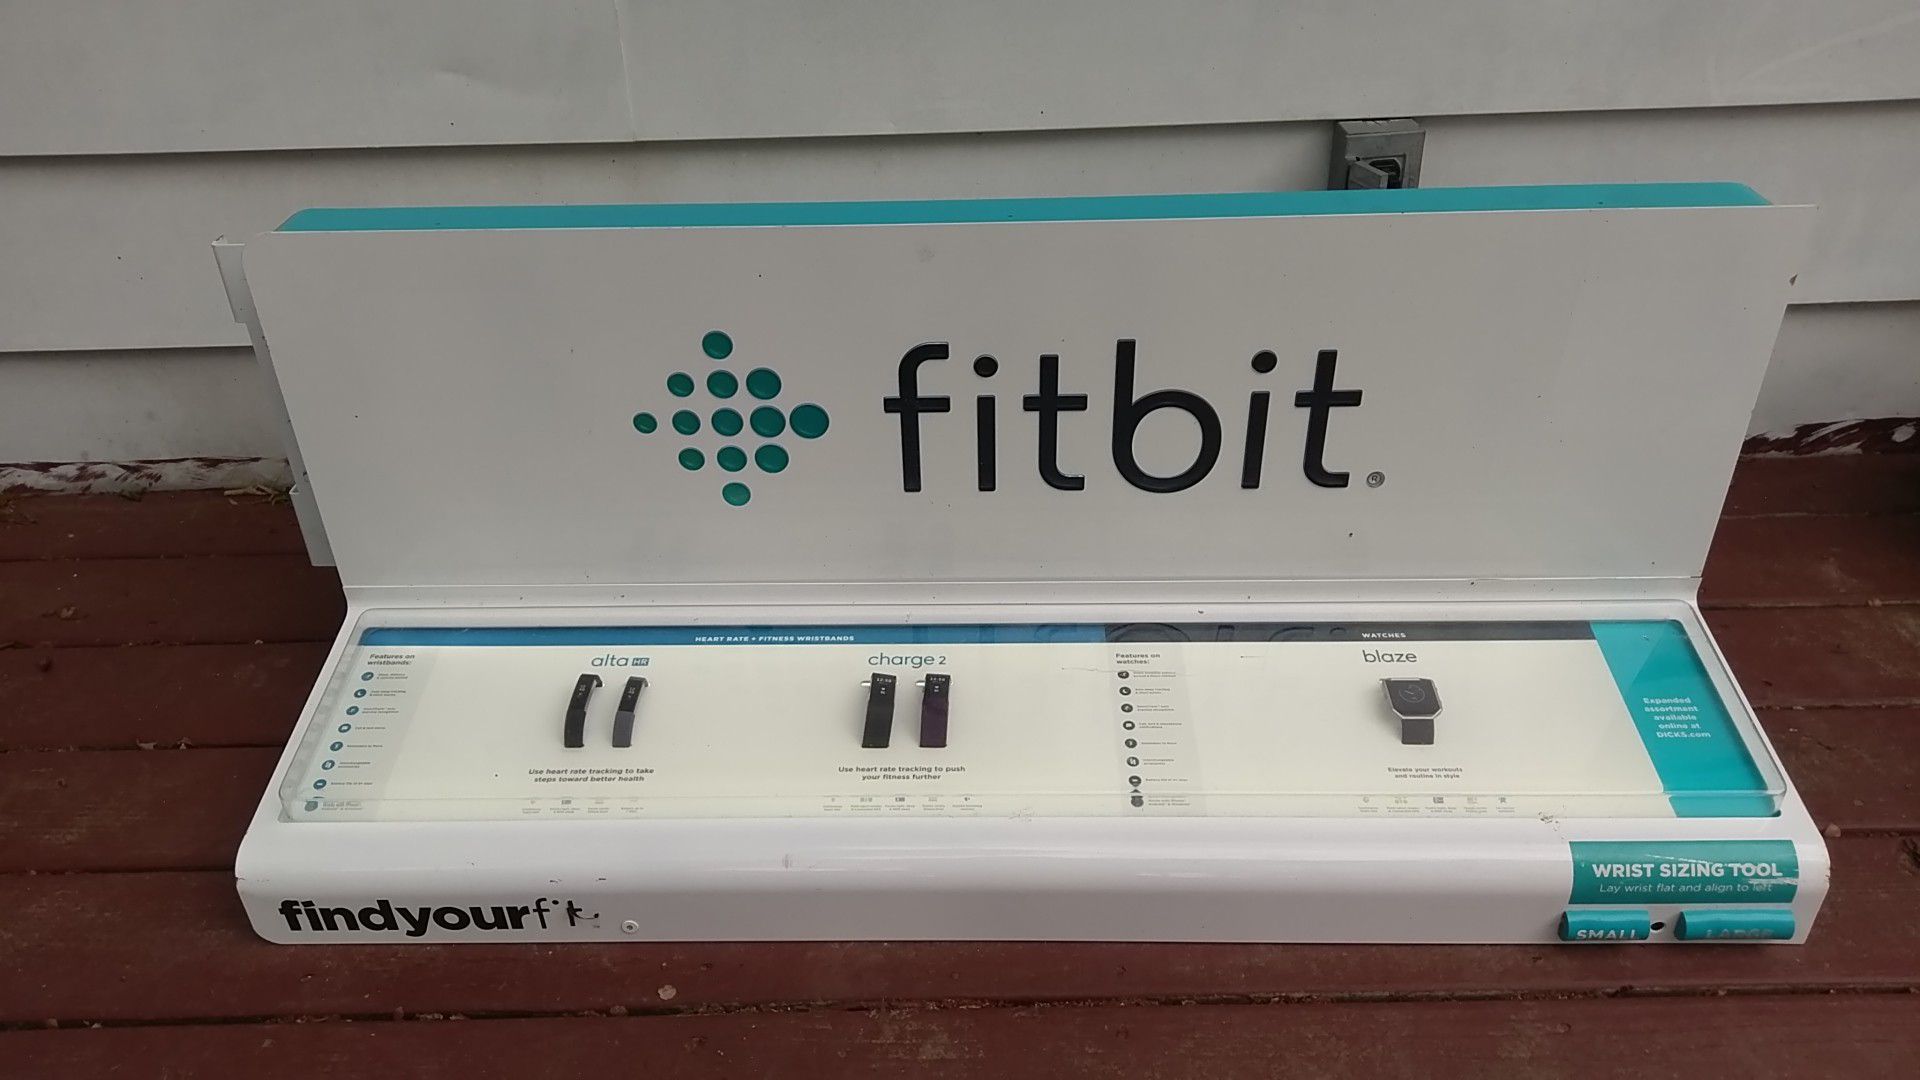 Built in LED lights FitBit sign. With fitness sample watches